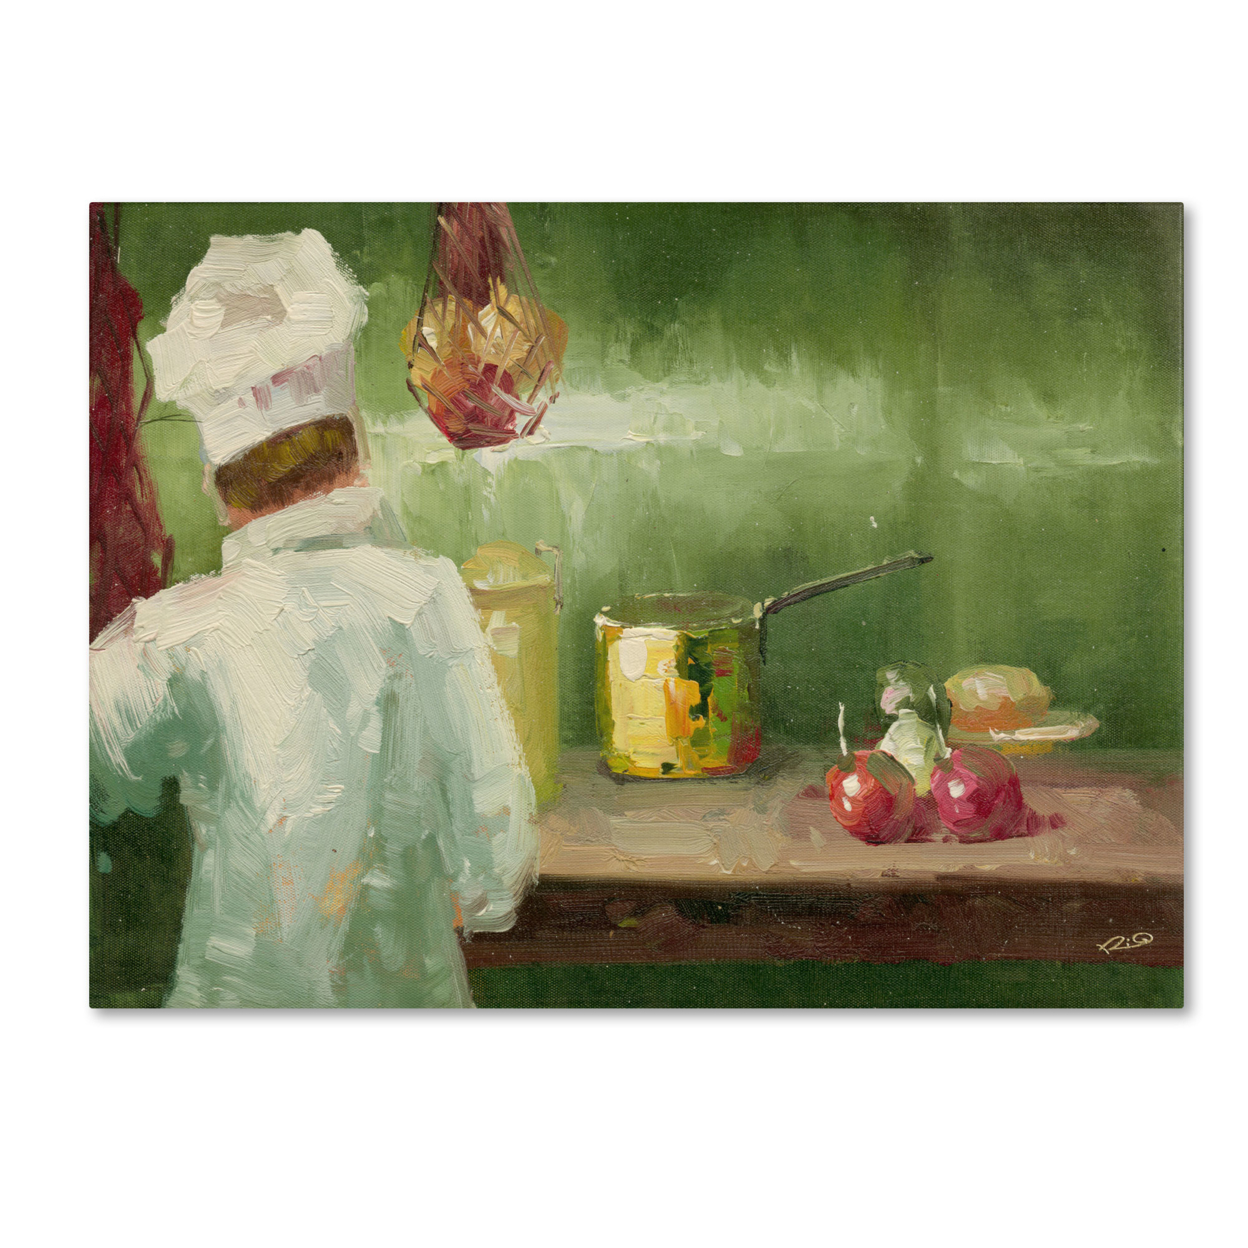 Rio 'What's Cooking' Canvas Wall Art 35 X 47 Inches